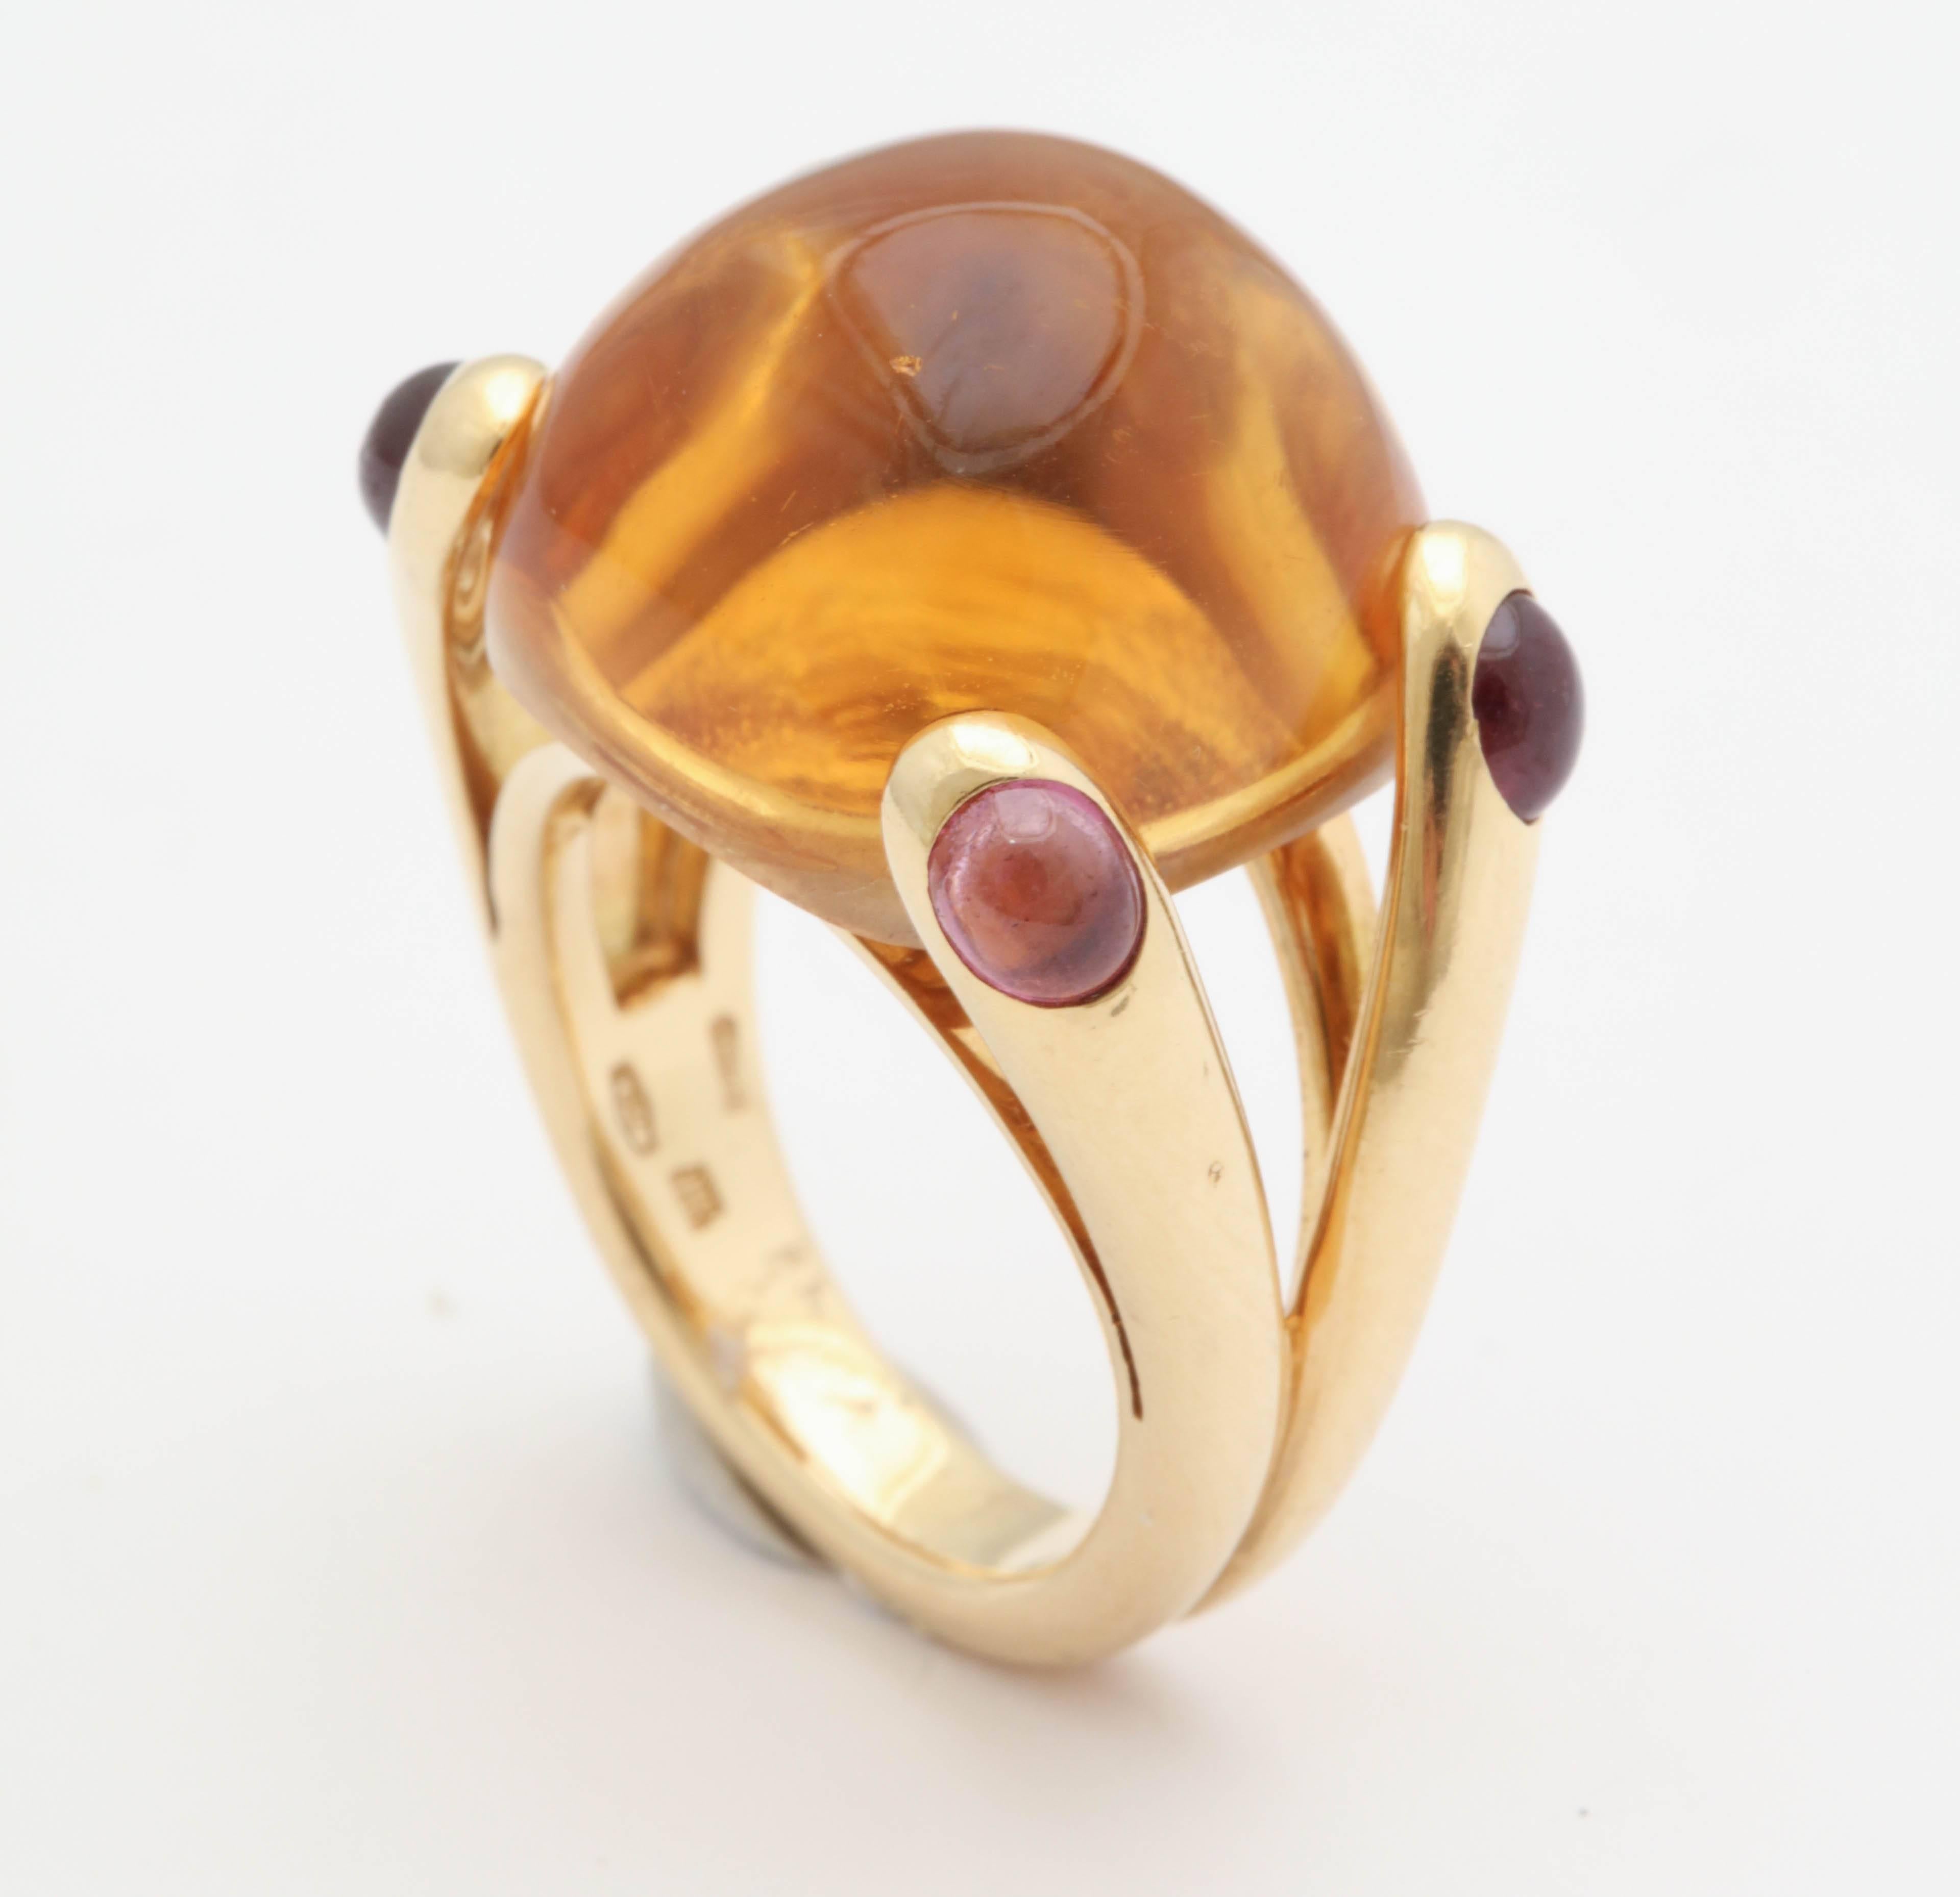 One Ladies Dome Ring Designed With A 15 Carat Honey Color Cabochon Citrine Stone. Ring Is Further Flanked With Four Cabochon Cut Pink Tourmalines. Current Ring Size 5 & 3/4 ,May Be Resized.Designed By Verdura In Italy In The 1980's.NOTE:These